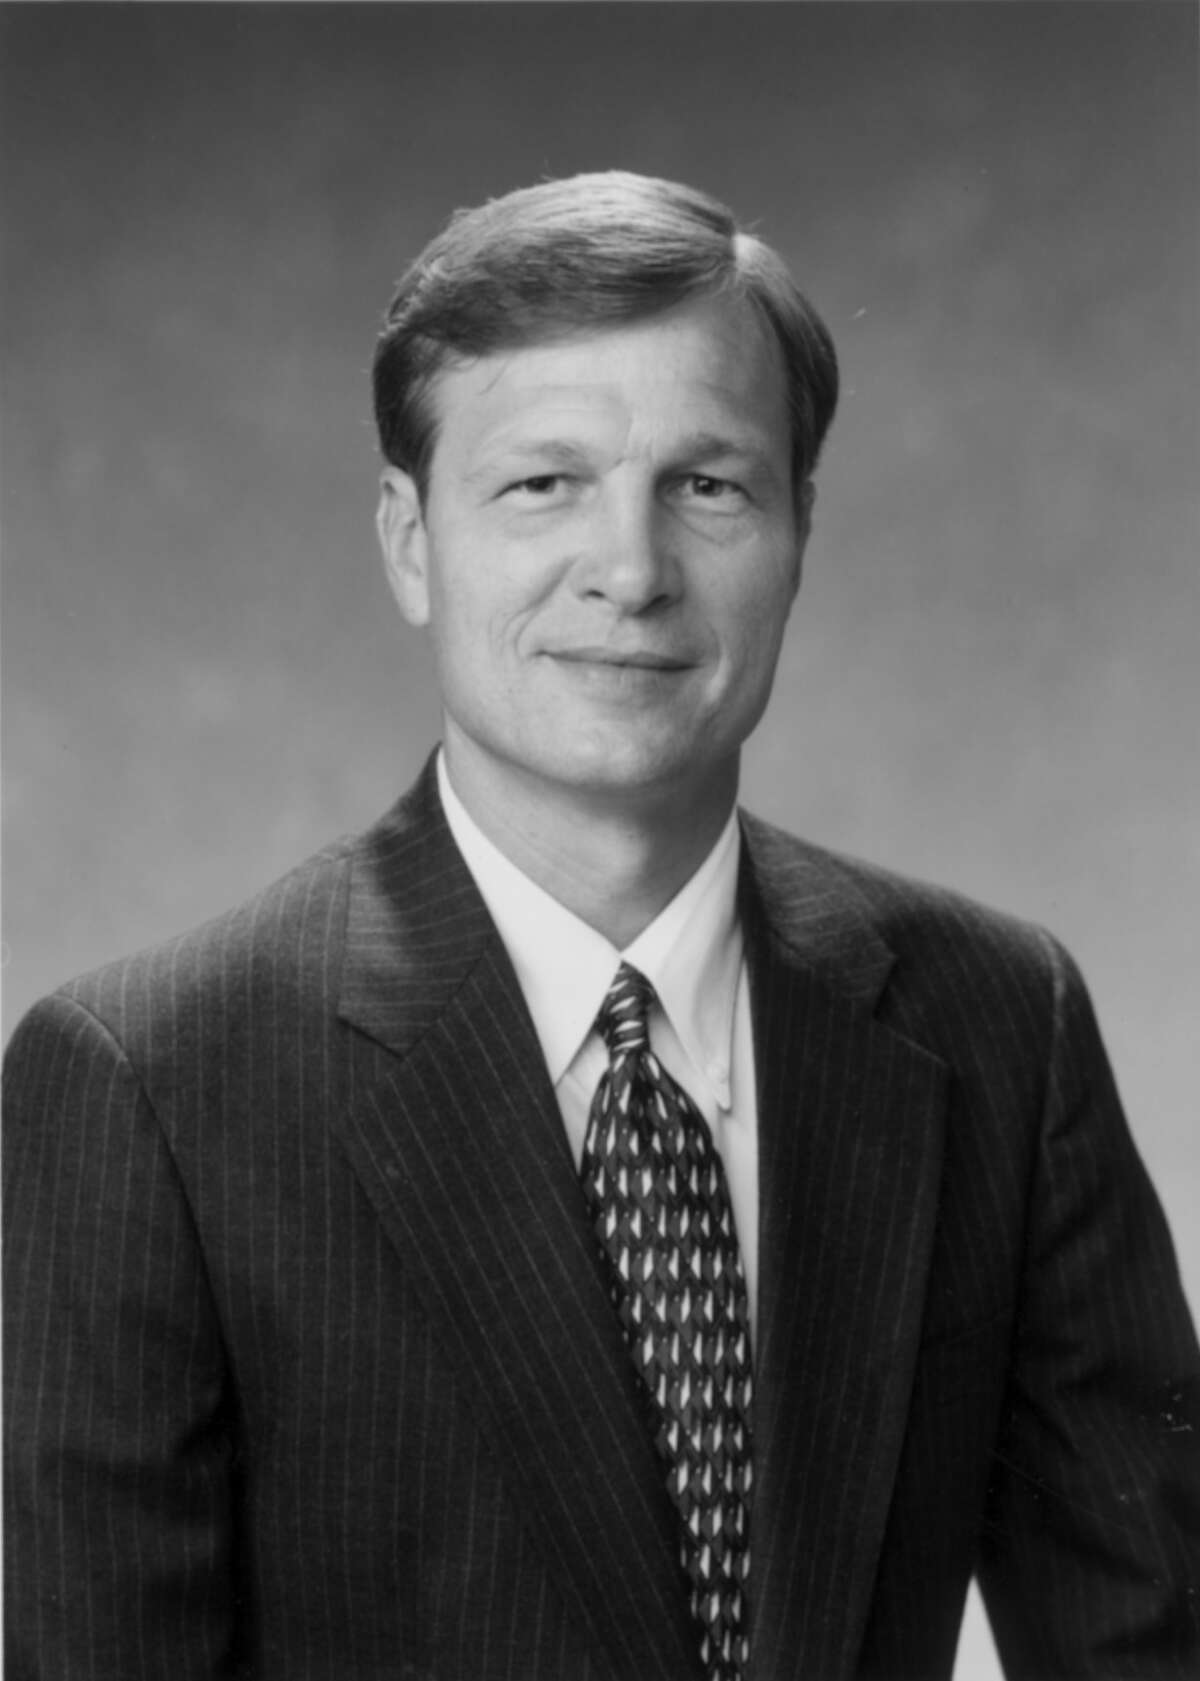 Brian Babin. Rep. cand. U.S. Congressional Dist. 2. 1998 ( voters guide ) HOUCHRON CAPTION (10/25/1998): Republican BRIAN BABIN HOUSTON CHRONICLE SPECIAL SECTION: VOTER'S GUIDE OCTOBER 1998.